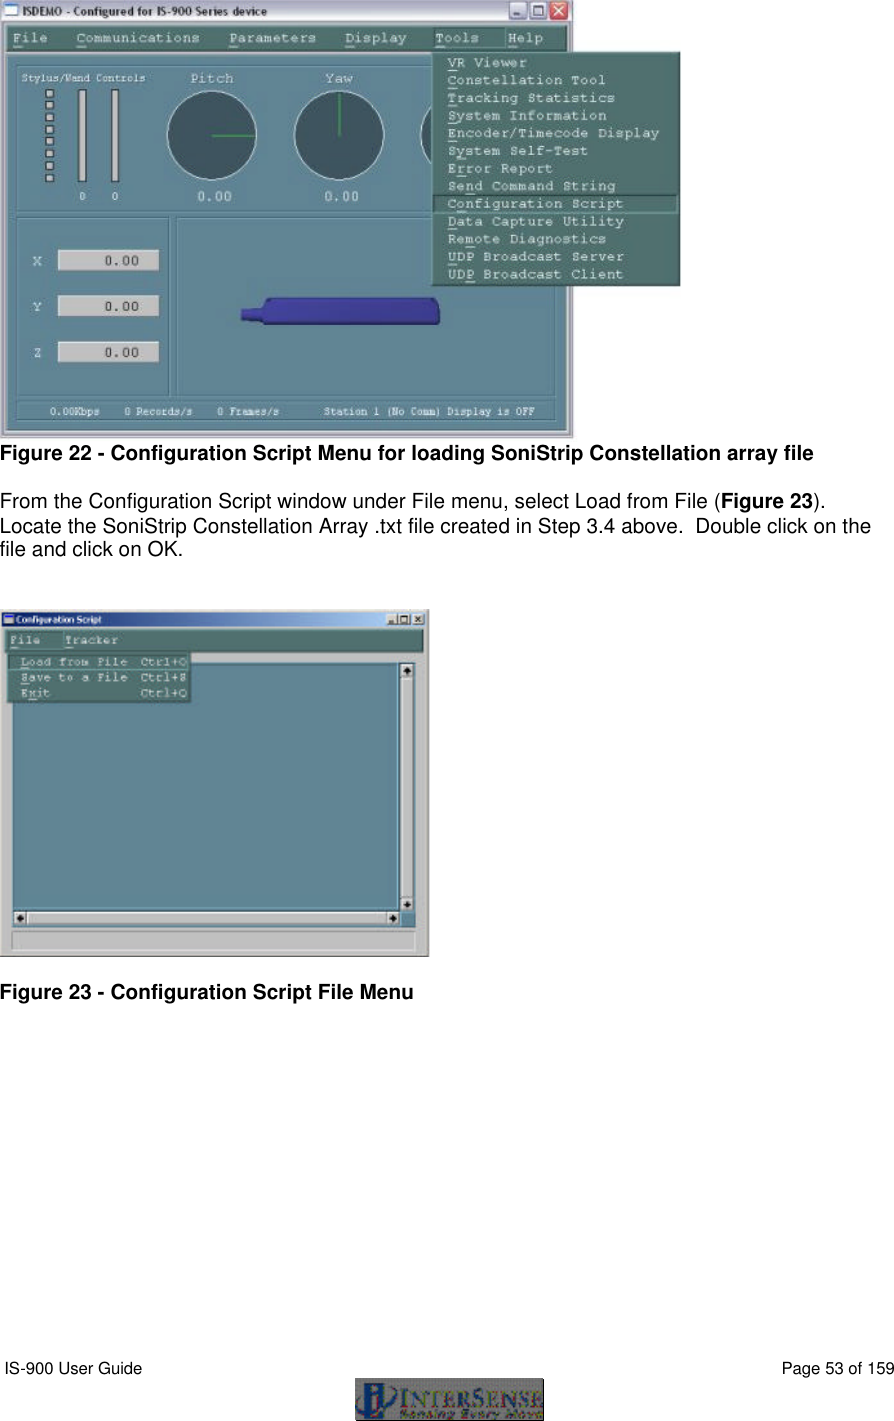  IS-900 User Guide                                                                                                                                          Page 53 of 159   Figure 22 - Configuration Script Menu for loading SoniStrip Constellation array file  From the Configuration Script window under File menu, select Load from File (Figure 23).  Locate the SoniStrip Constellation Array .txt file created in Step 3.4 above.  Double click on the file and click on OK.     Figure 23 - Configuration Script File Menu  